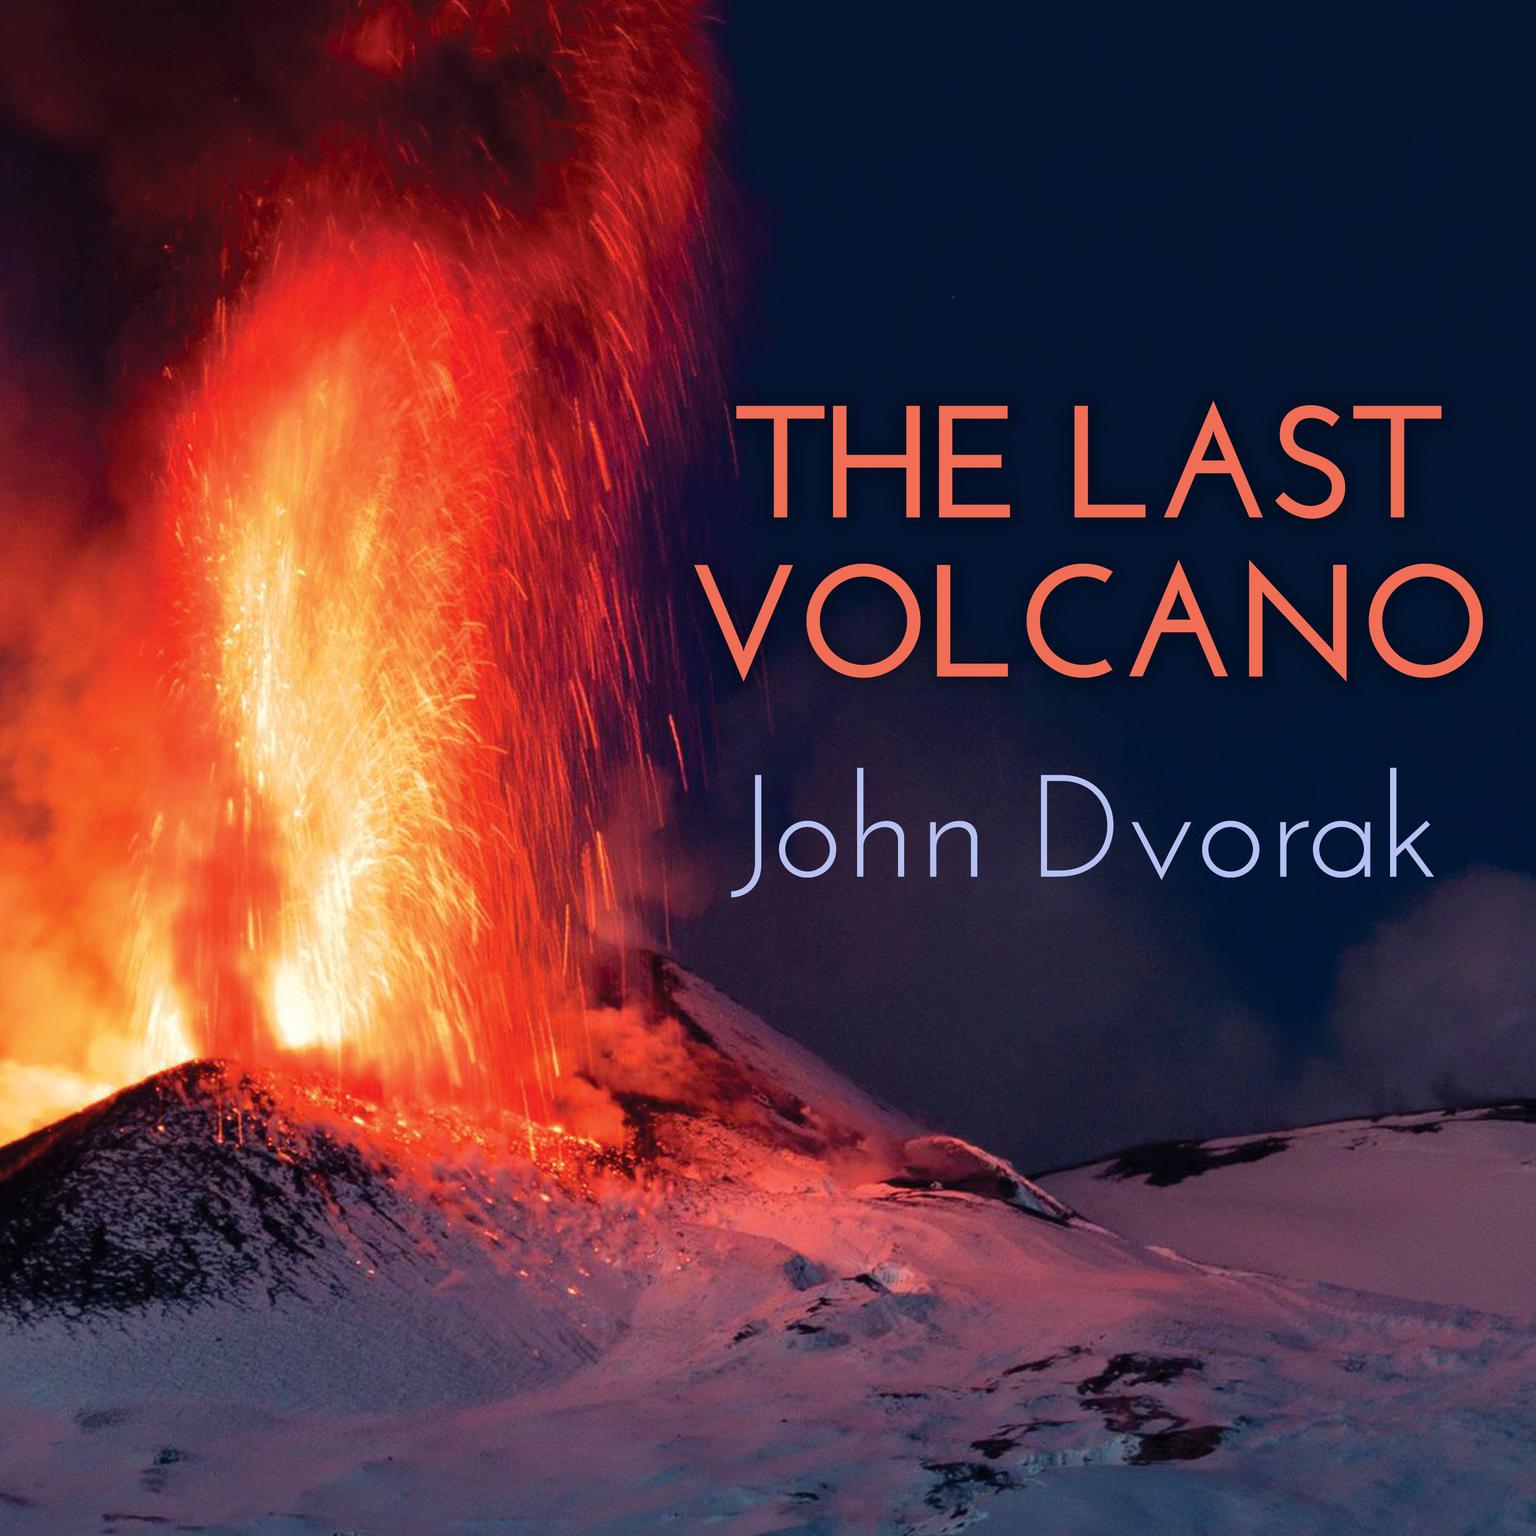 The Last Volcano: A Man, a Romance, and the Quest to Understand Natures Most Magnificent Fury Audiobook, by John Dvorak